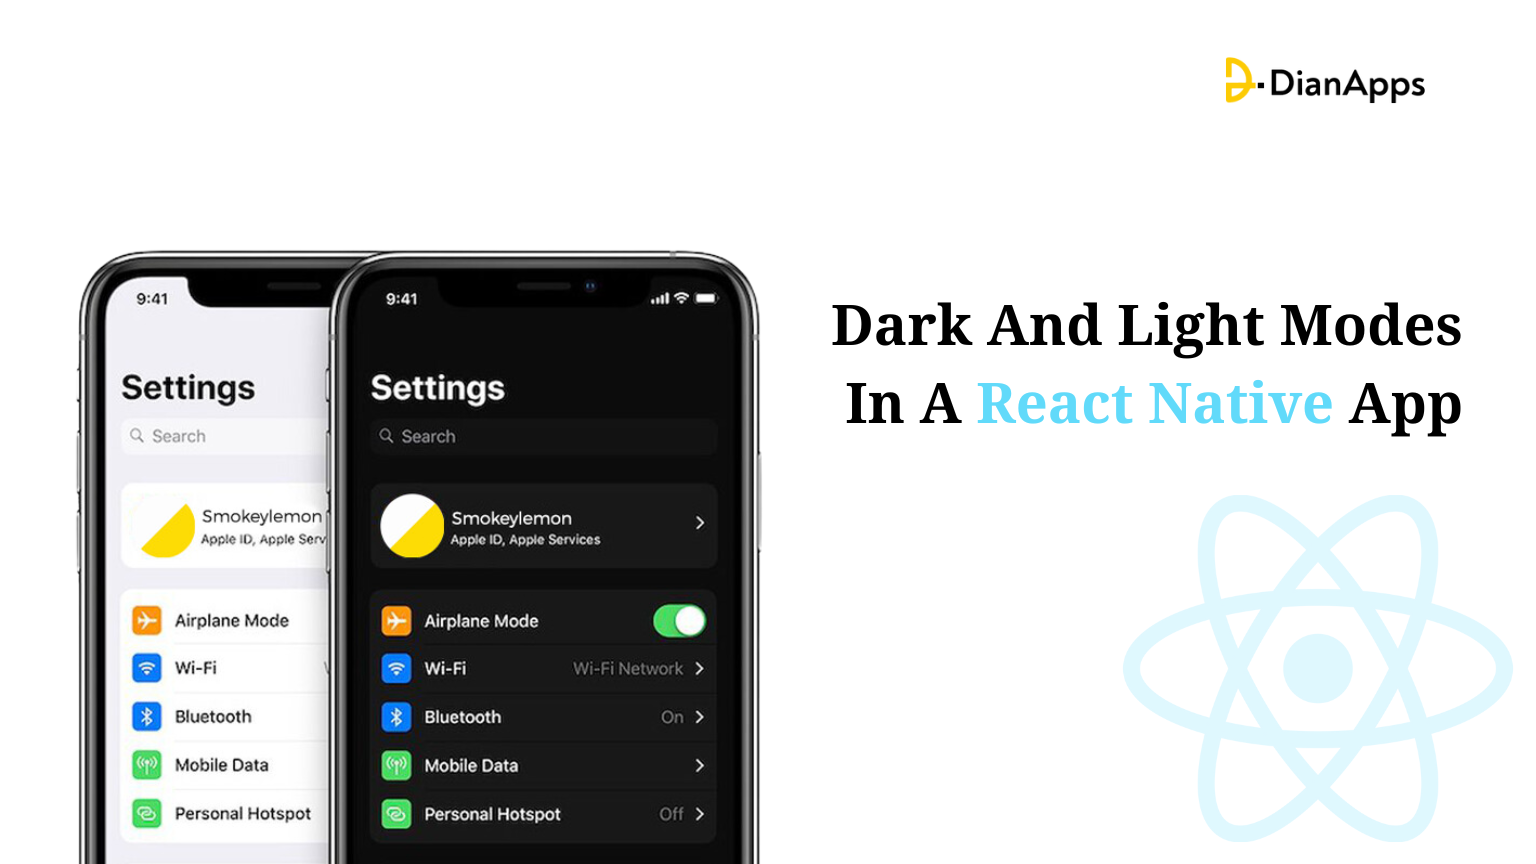 Dark And Light Modes In A React Native App